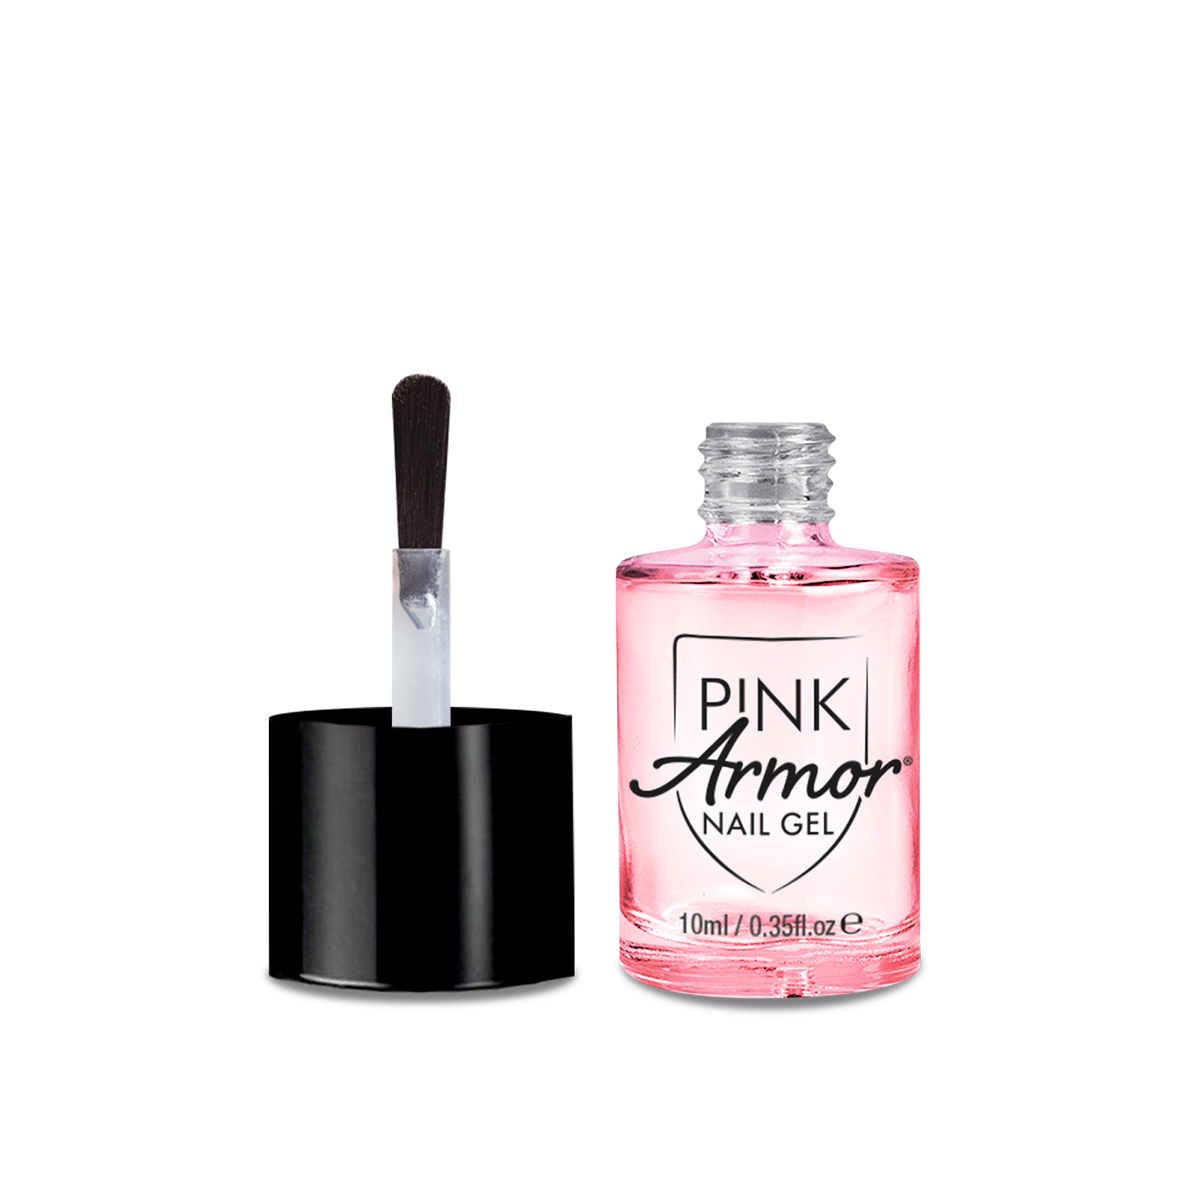 JML | Pink Armor - The nail gel that strengthens, seals and protects